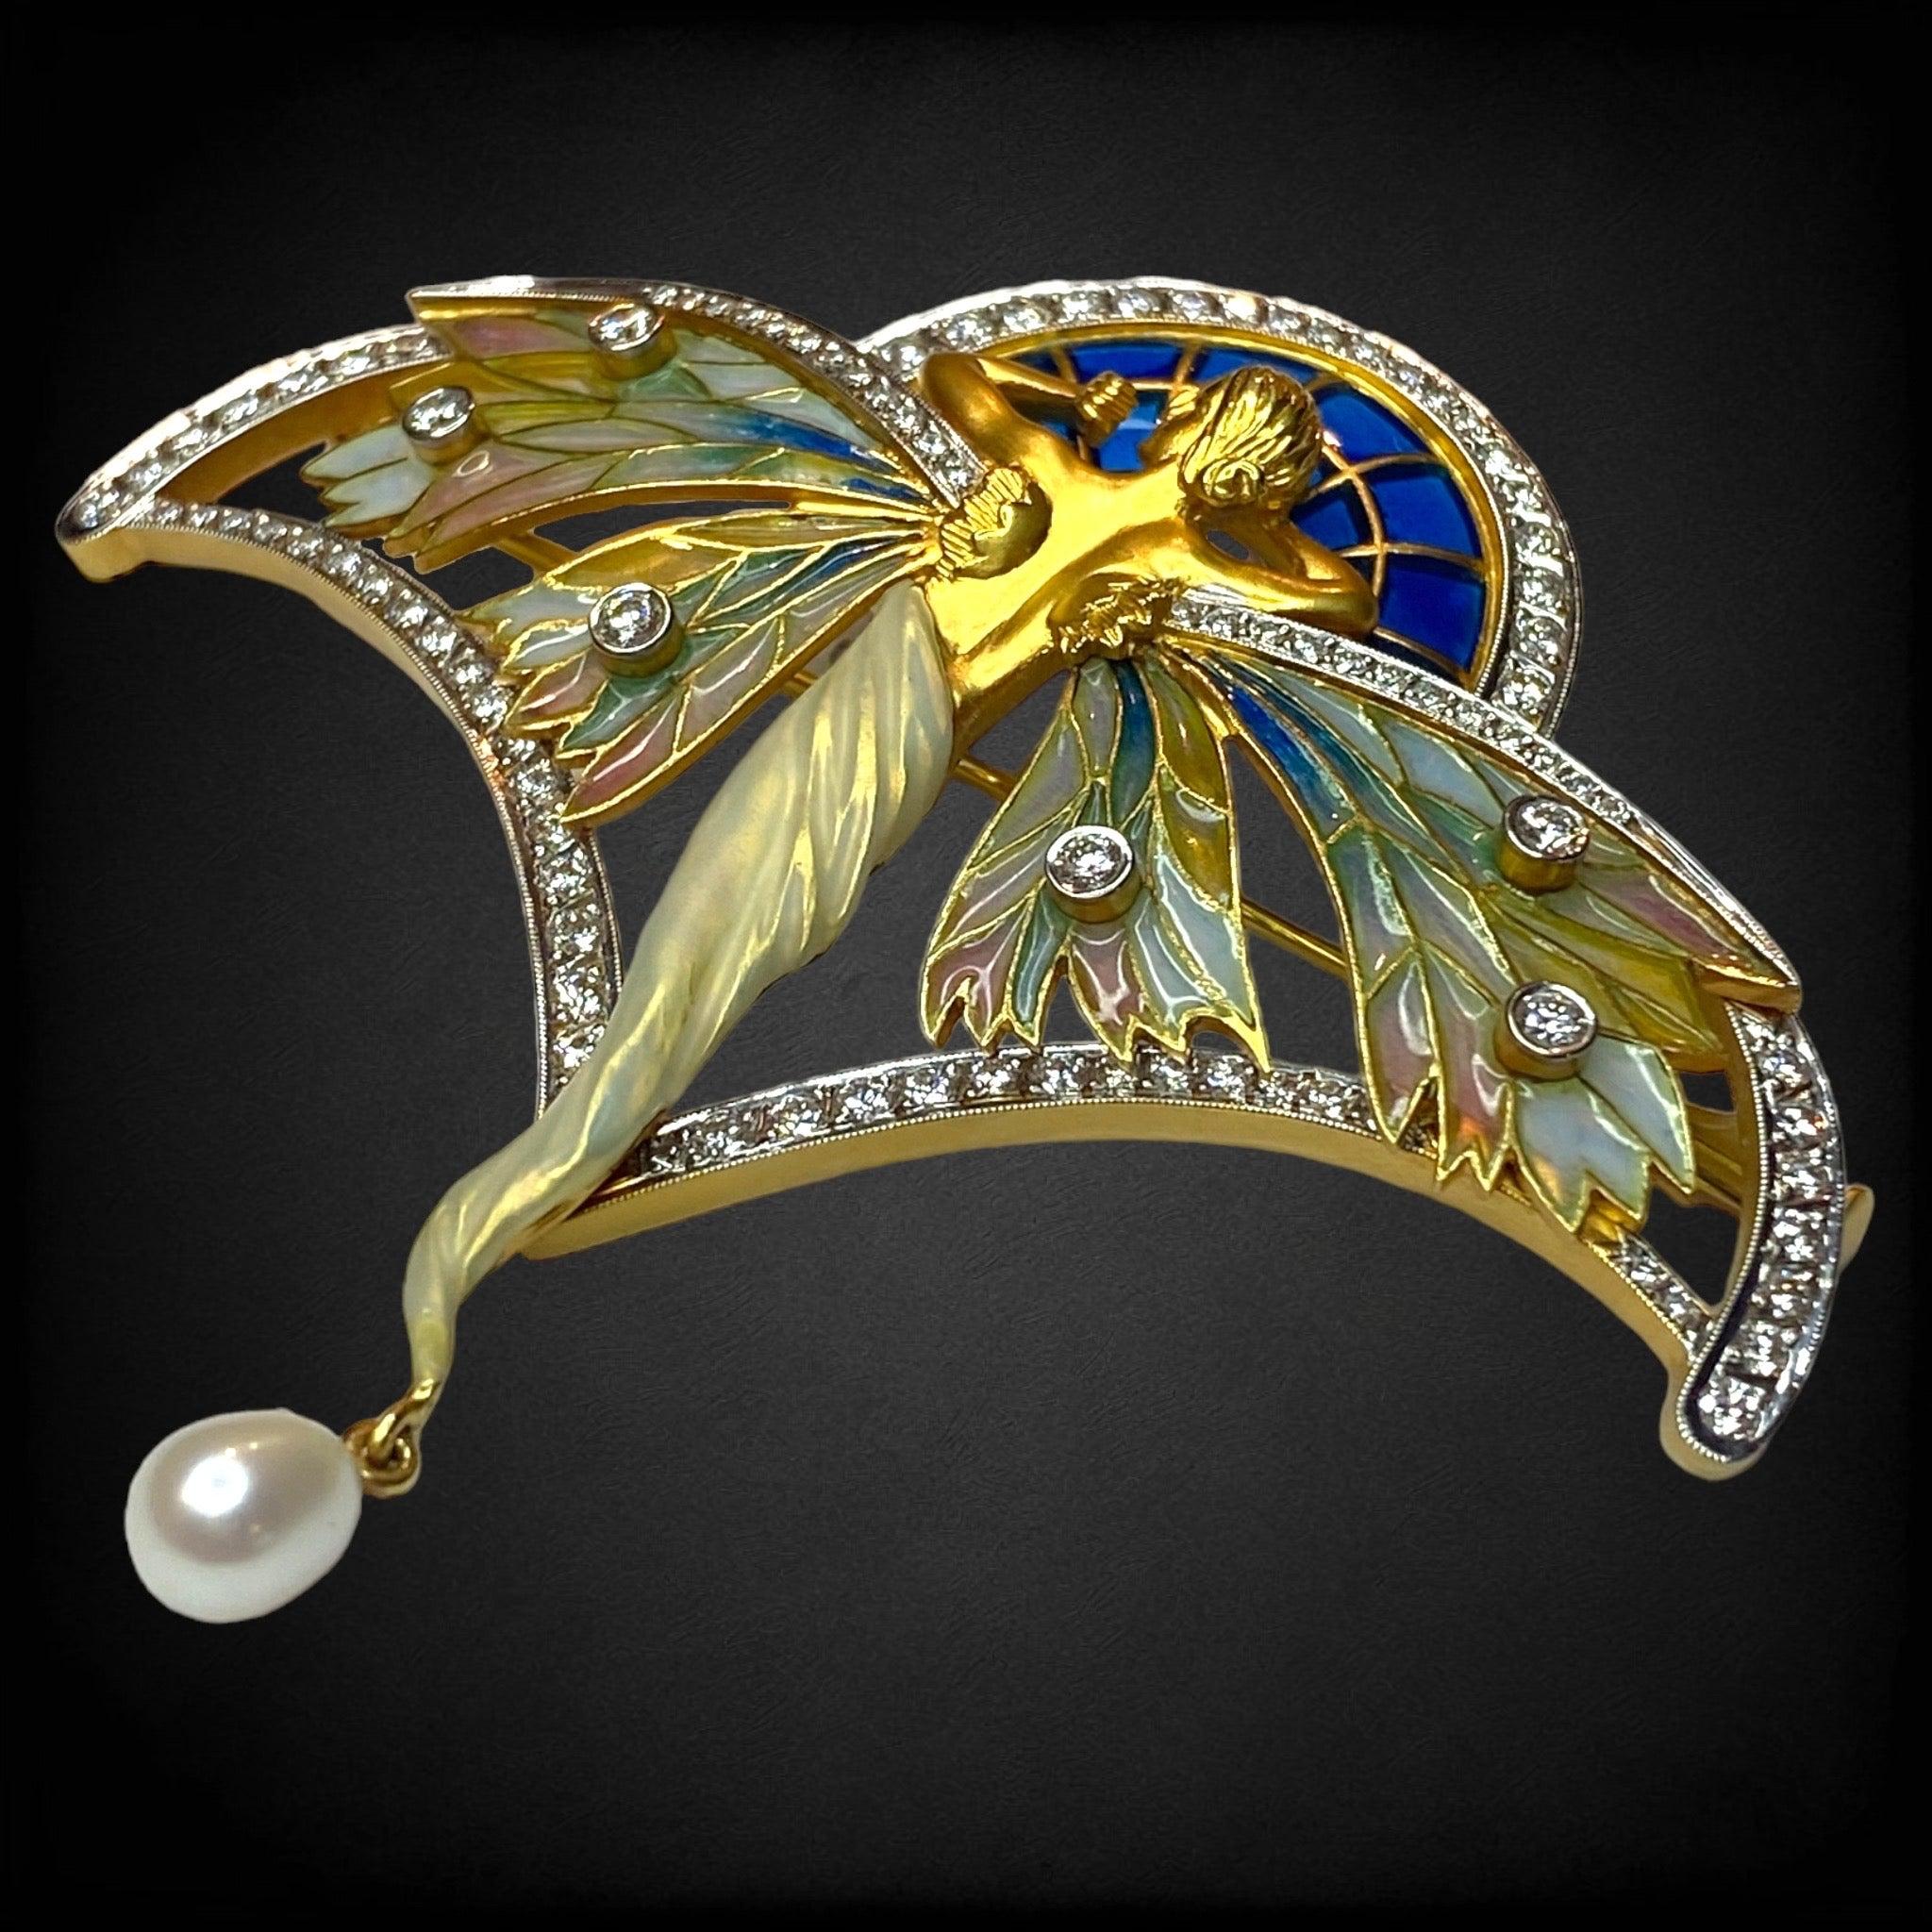 From the house of the prolific Art Nouveau designer, Luis Masriera, comes a long tradition of prestige, creativity and unparalleled craftsmanship. These stylistically distinctive works of art, have been crafted by Masriera since 1839. The company is